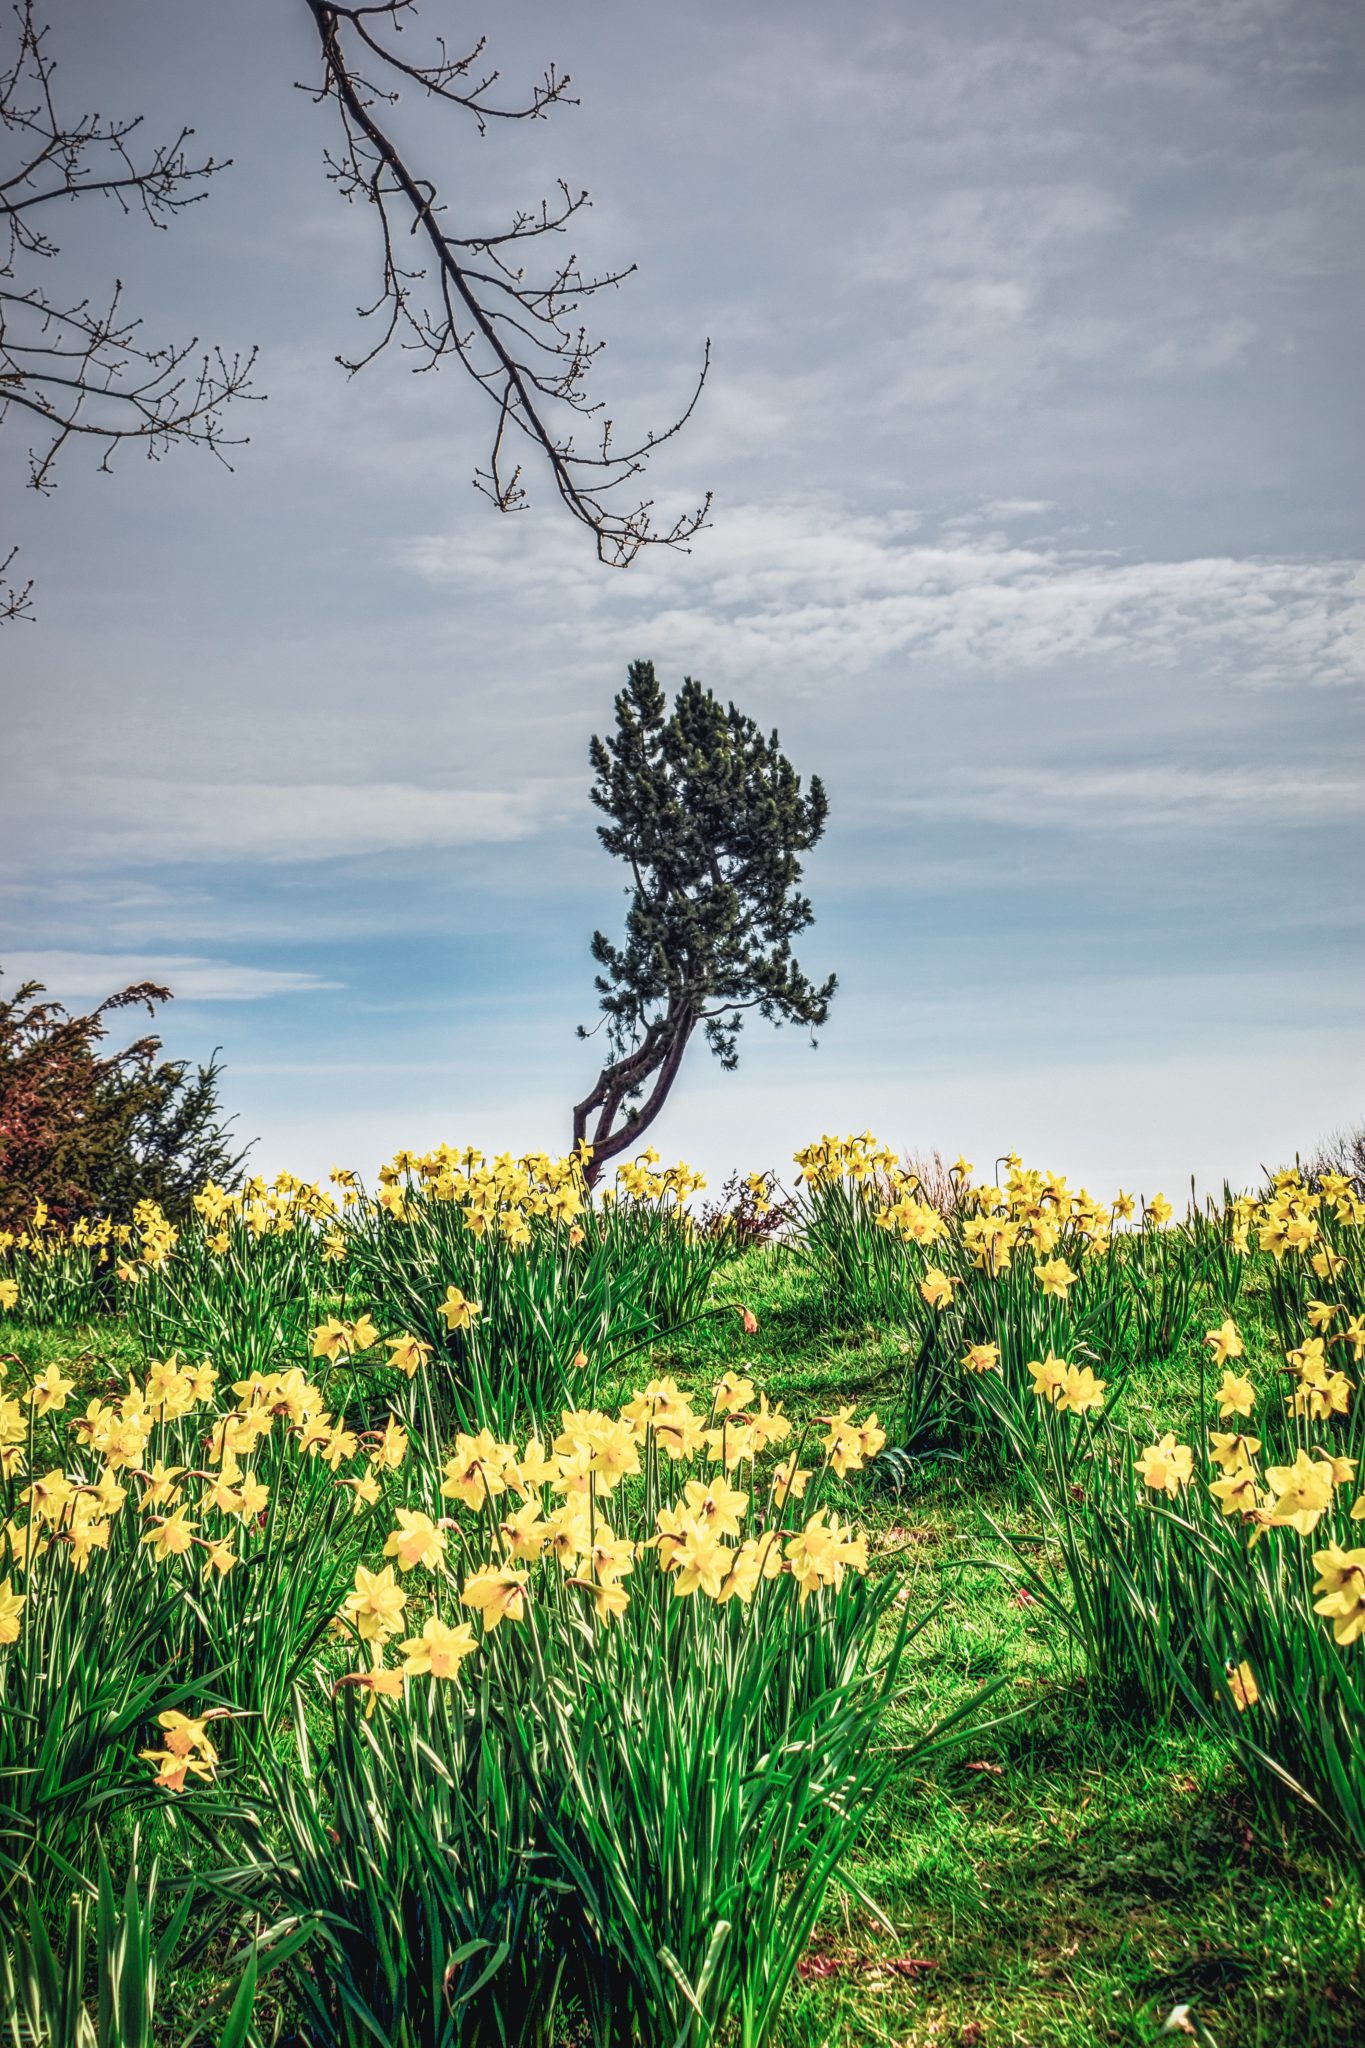 Hill of yellow daffodils with trees